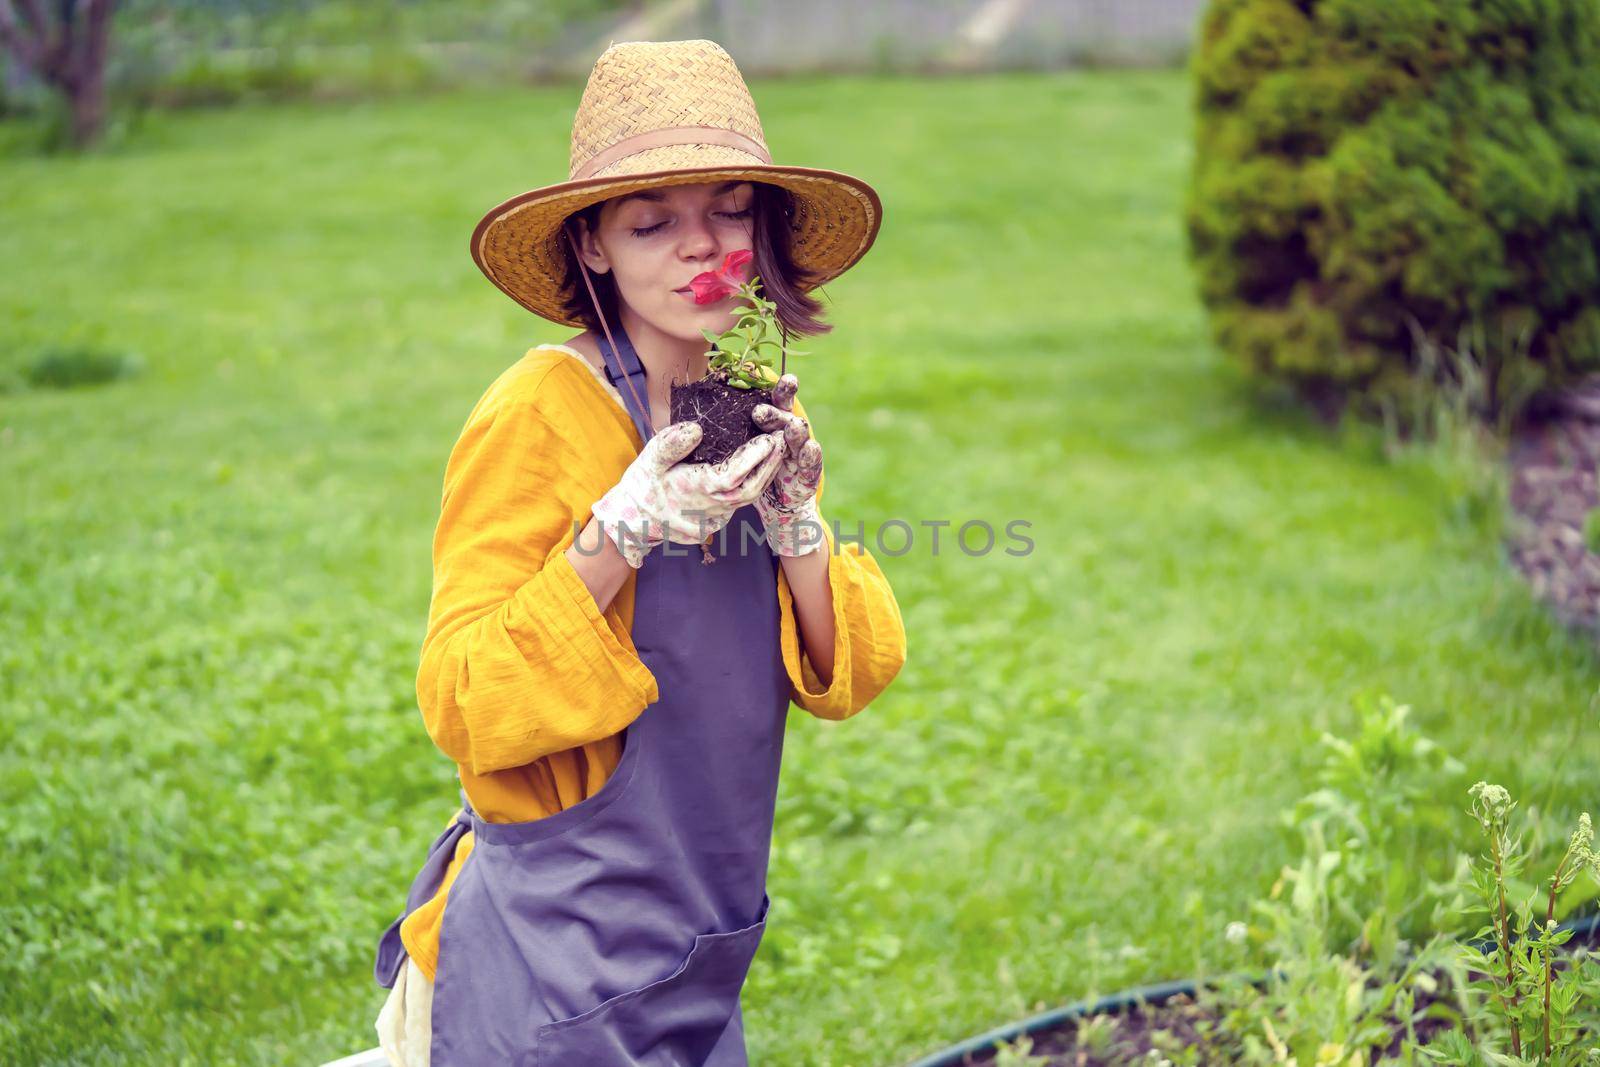 A young woman gardener in a straw hat and hands in gloves is holding a petunia flower in a peat pot, sniffing the flower and smiling before planting a seedling